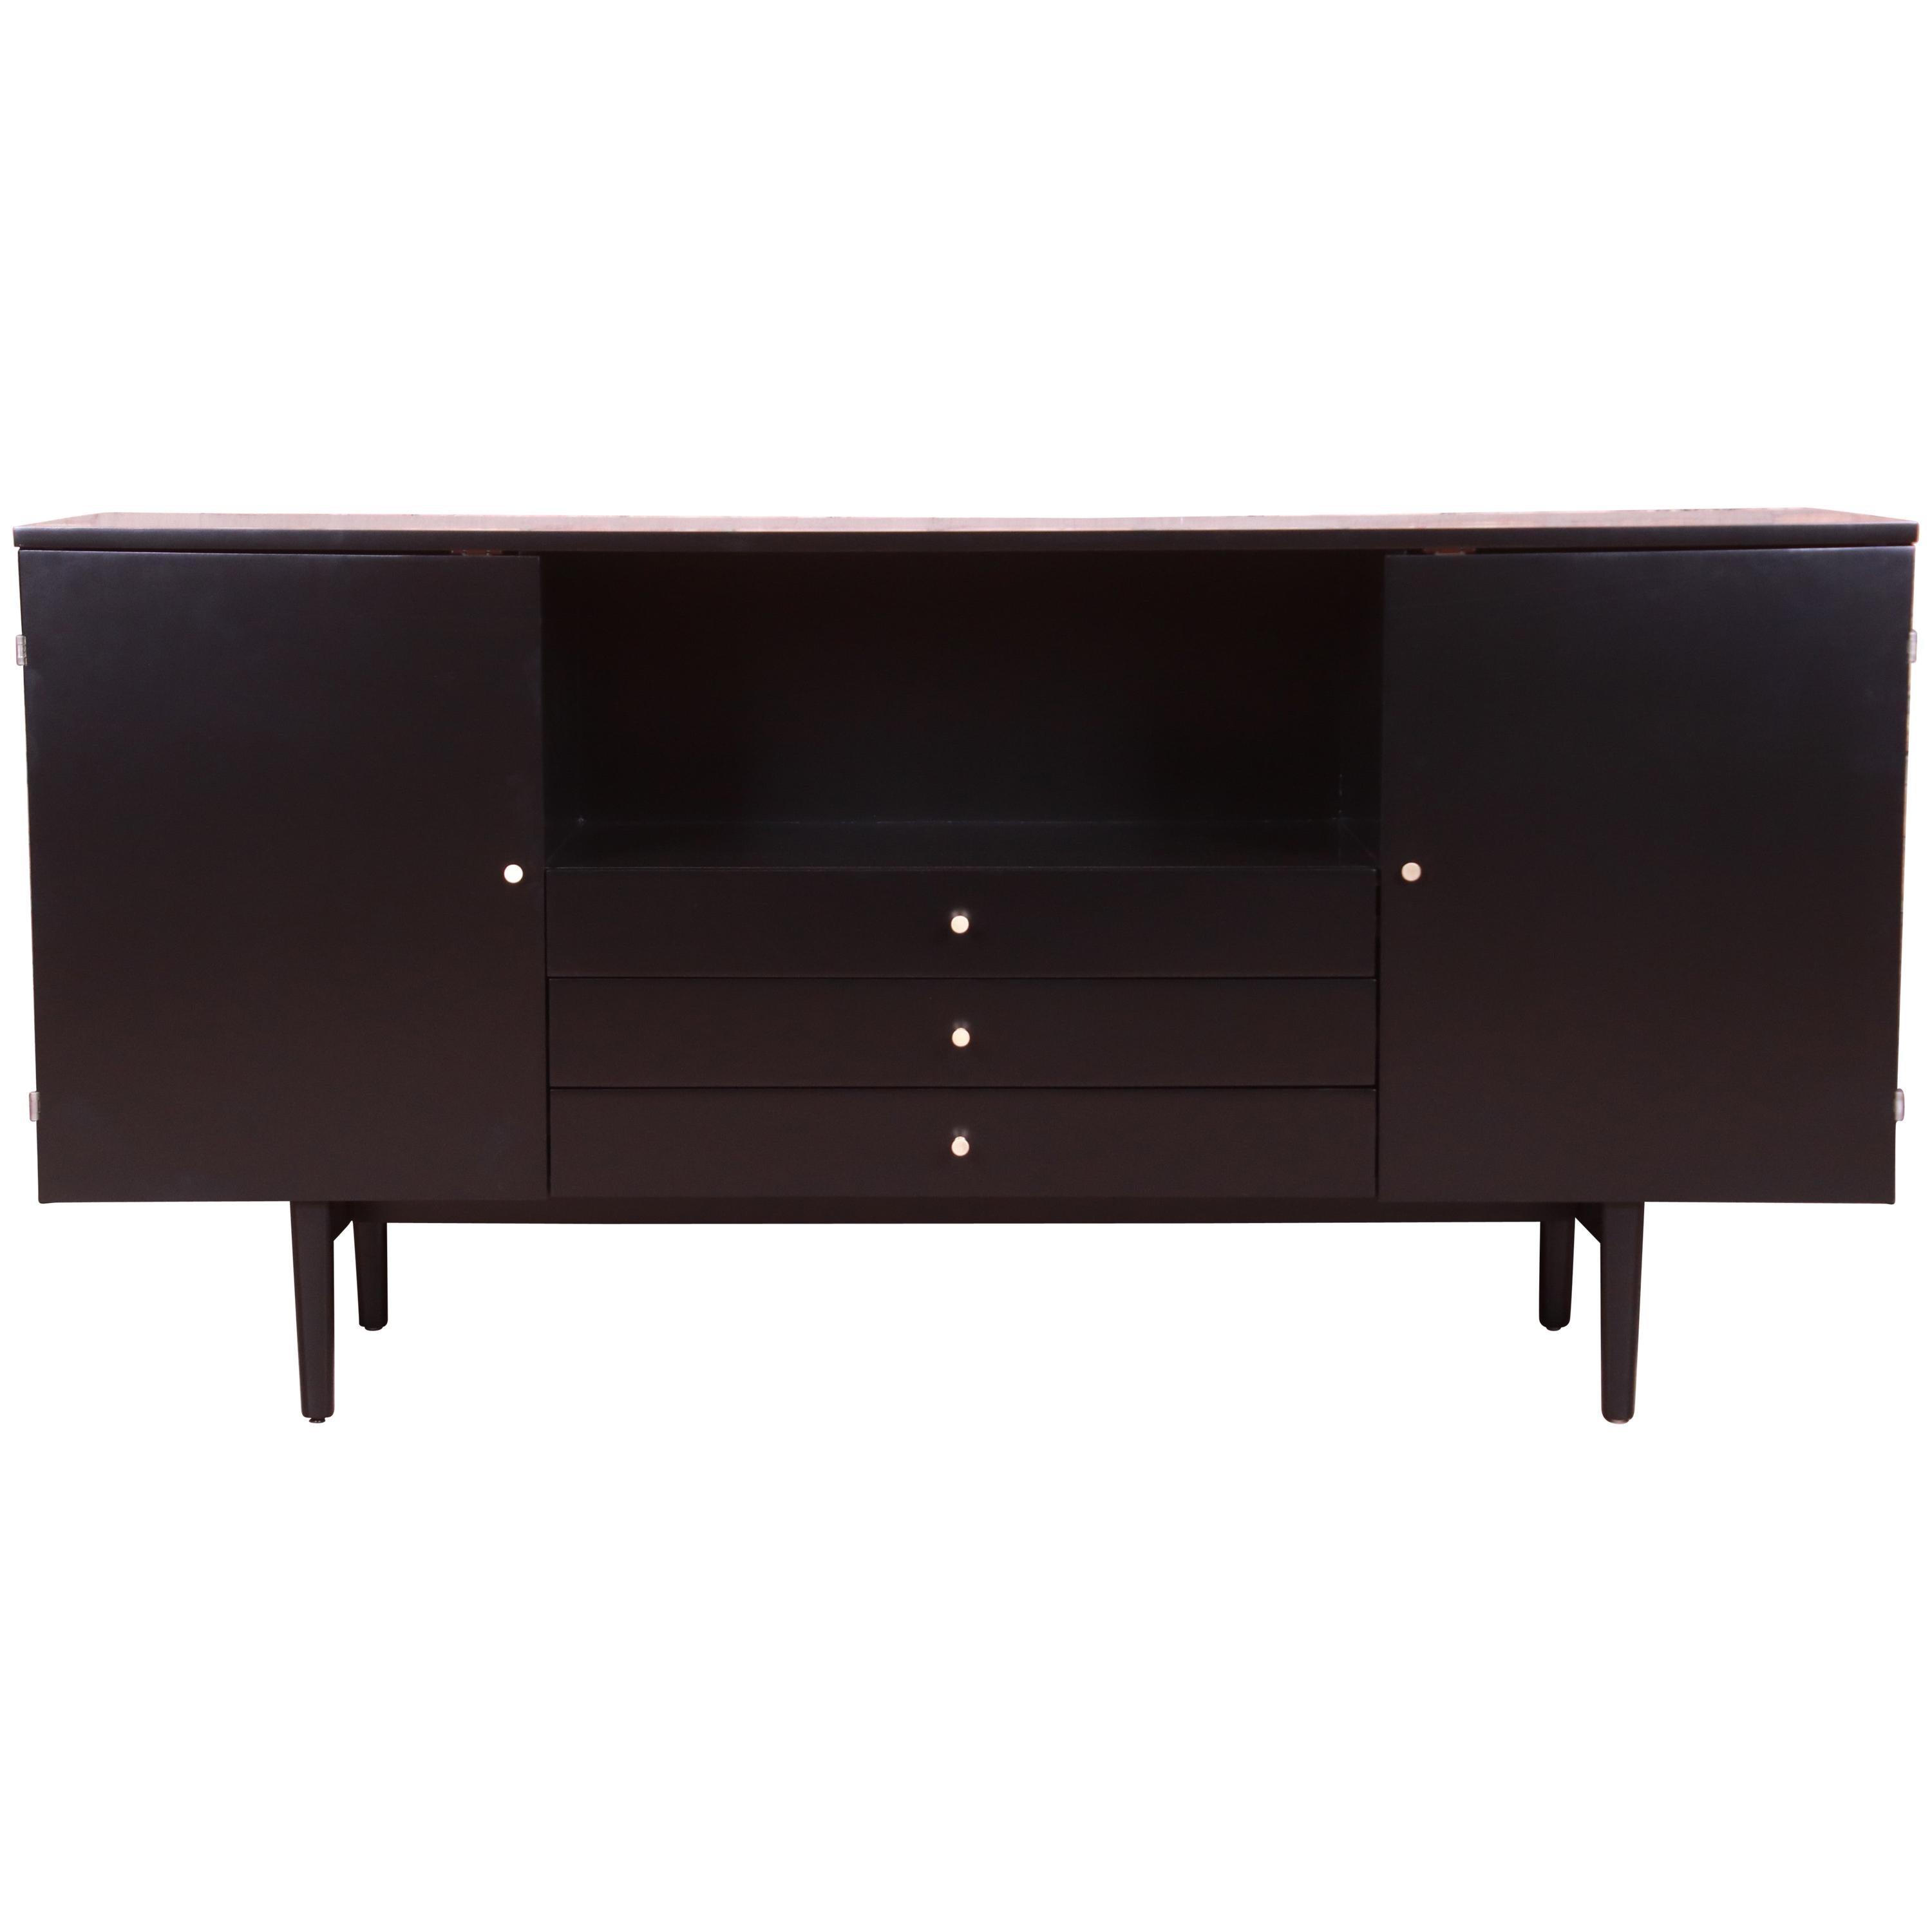 Paul McCobb Planner Group Black Lacquered Credenza or Media Cabinet, Refinished